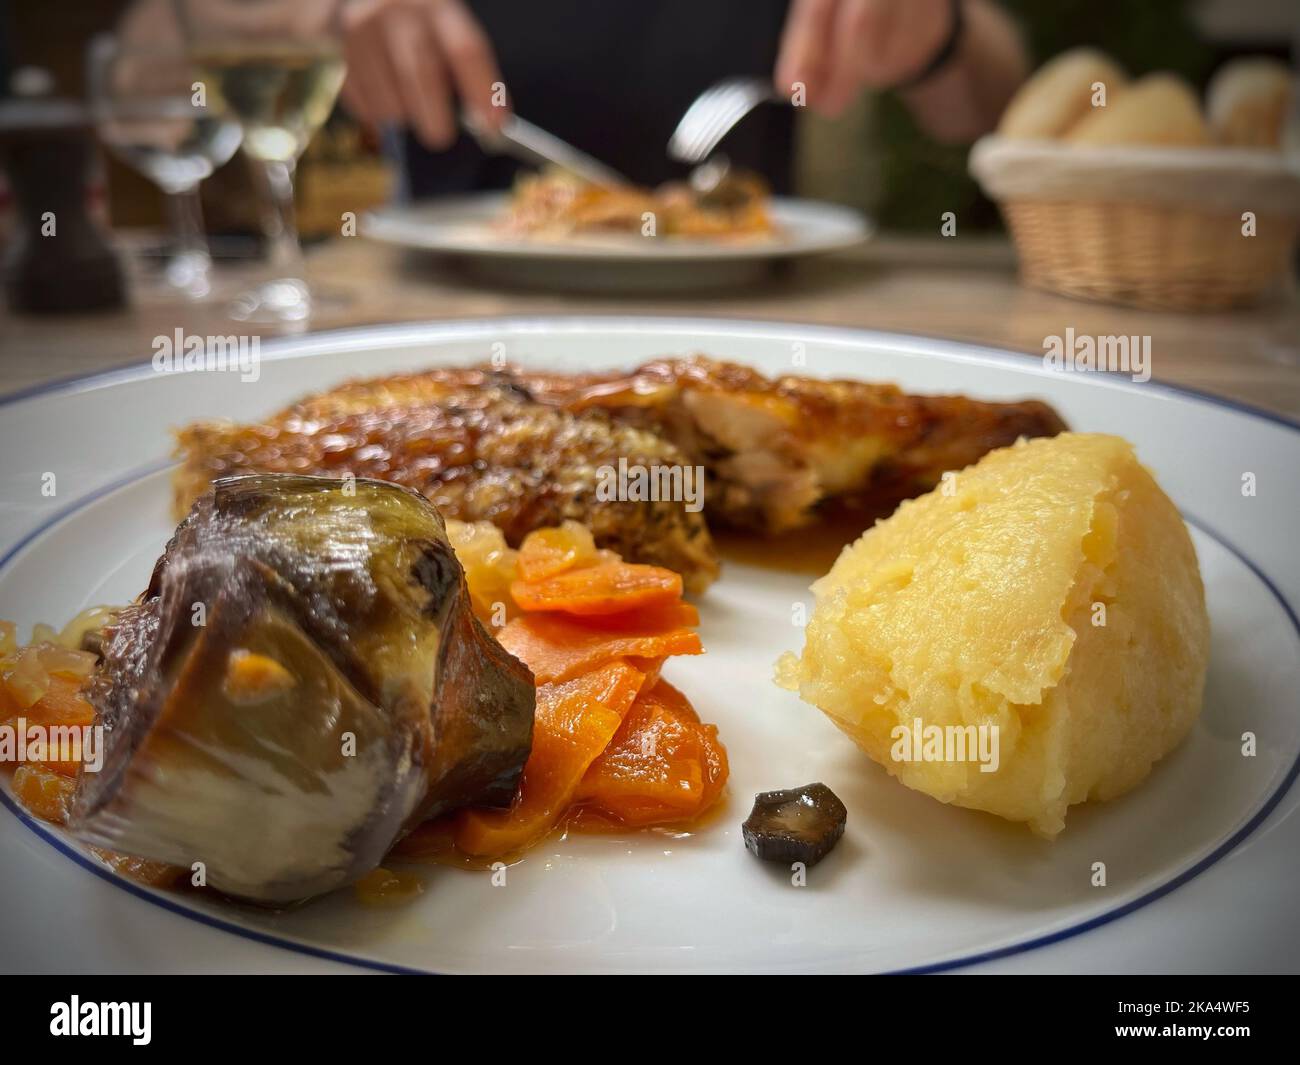 Close-up of chicken breast with potato, artichoke and carrot with a person eating in background Stock Photo